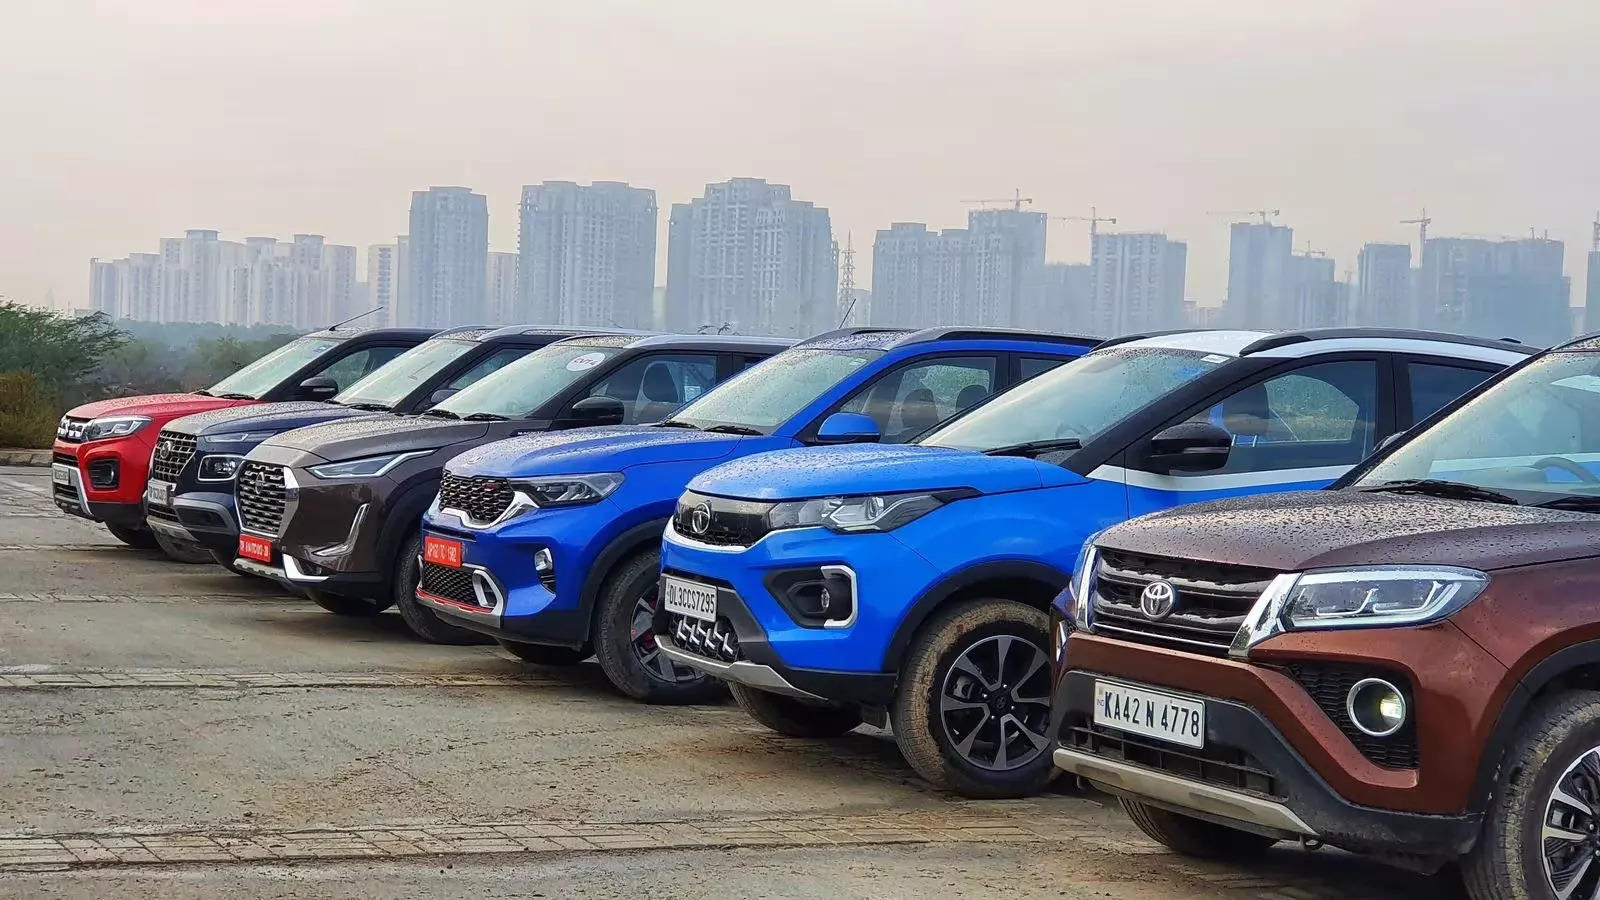 <p>SUV sales have grown to comprise 48.3% of total vehicle sales in the first six months of this fiscal year, up from 41.5% in H1FY23. The share of hatchbacks has slipped to 30% in H1FY24 from 35.1% in the same period last fiscal. Despite launches of several new models such as Hyundai Verna, Volkswagen Virtus and Skoda Slavia, the share of sedans, too, declined to 9.3% in the fiscal first half from 10.3% in H1FY23.</p>